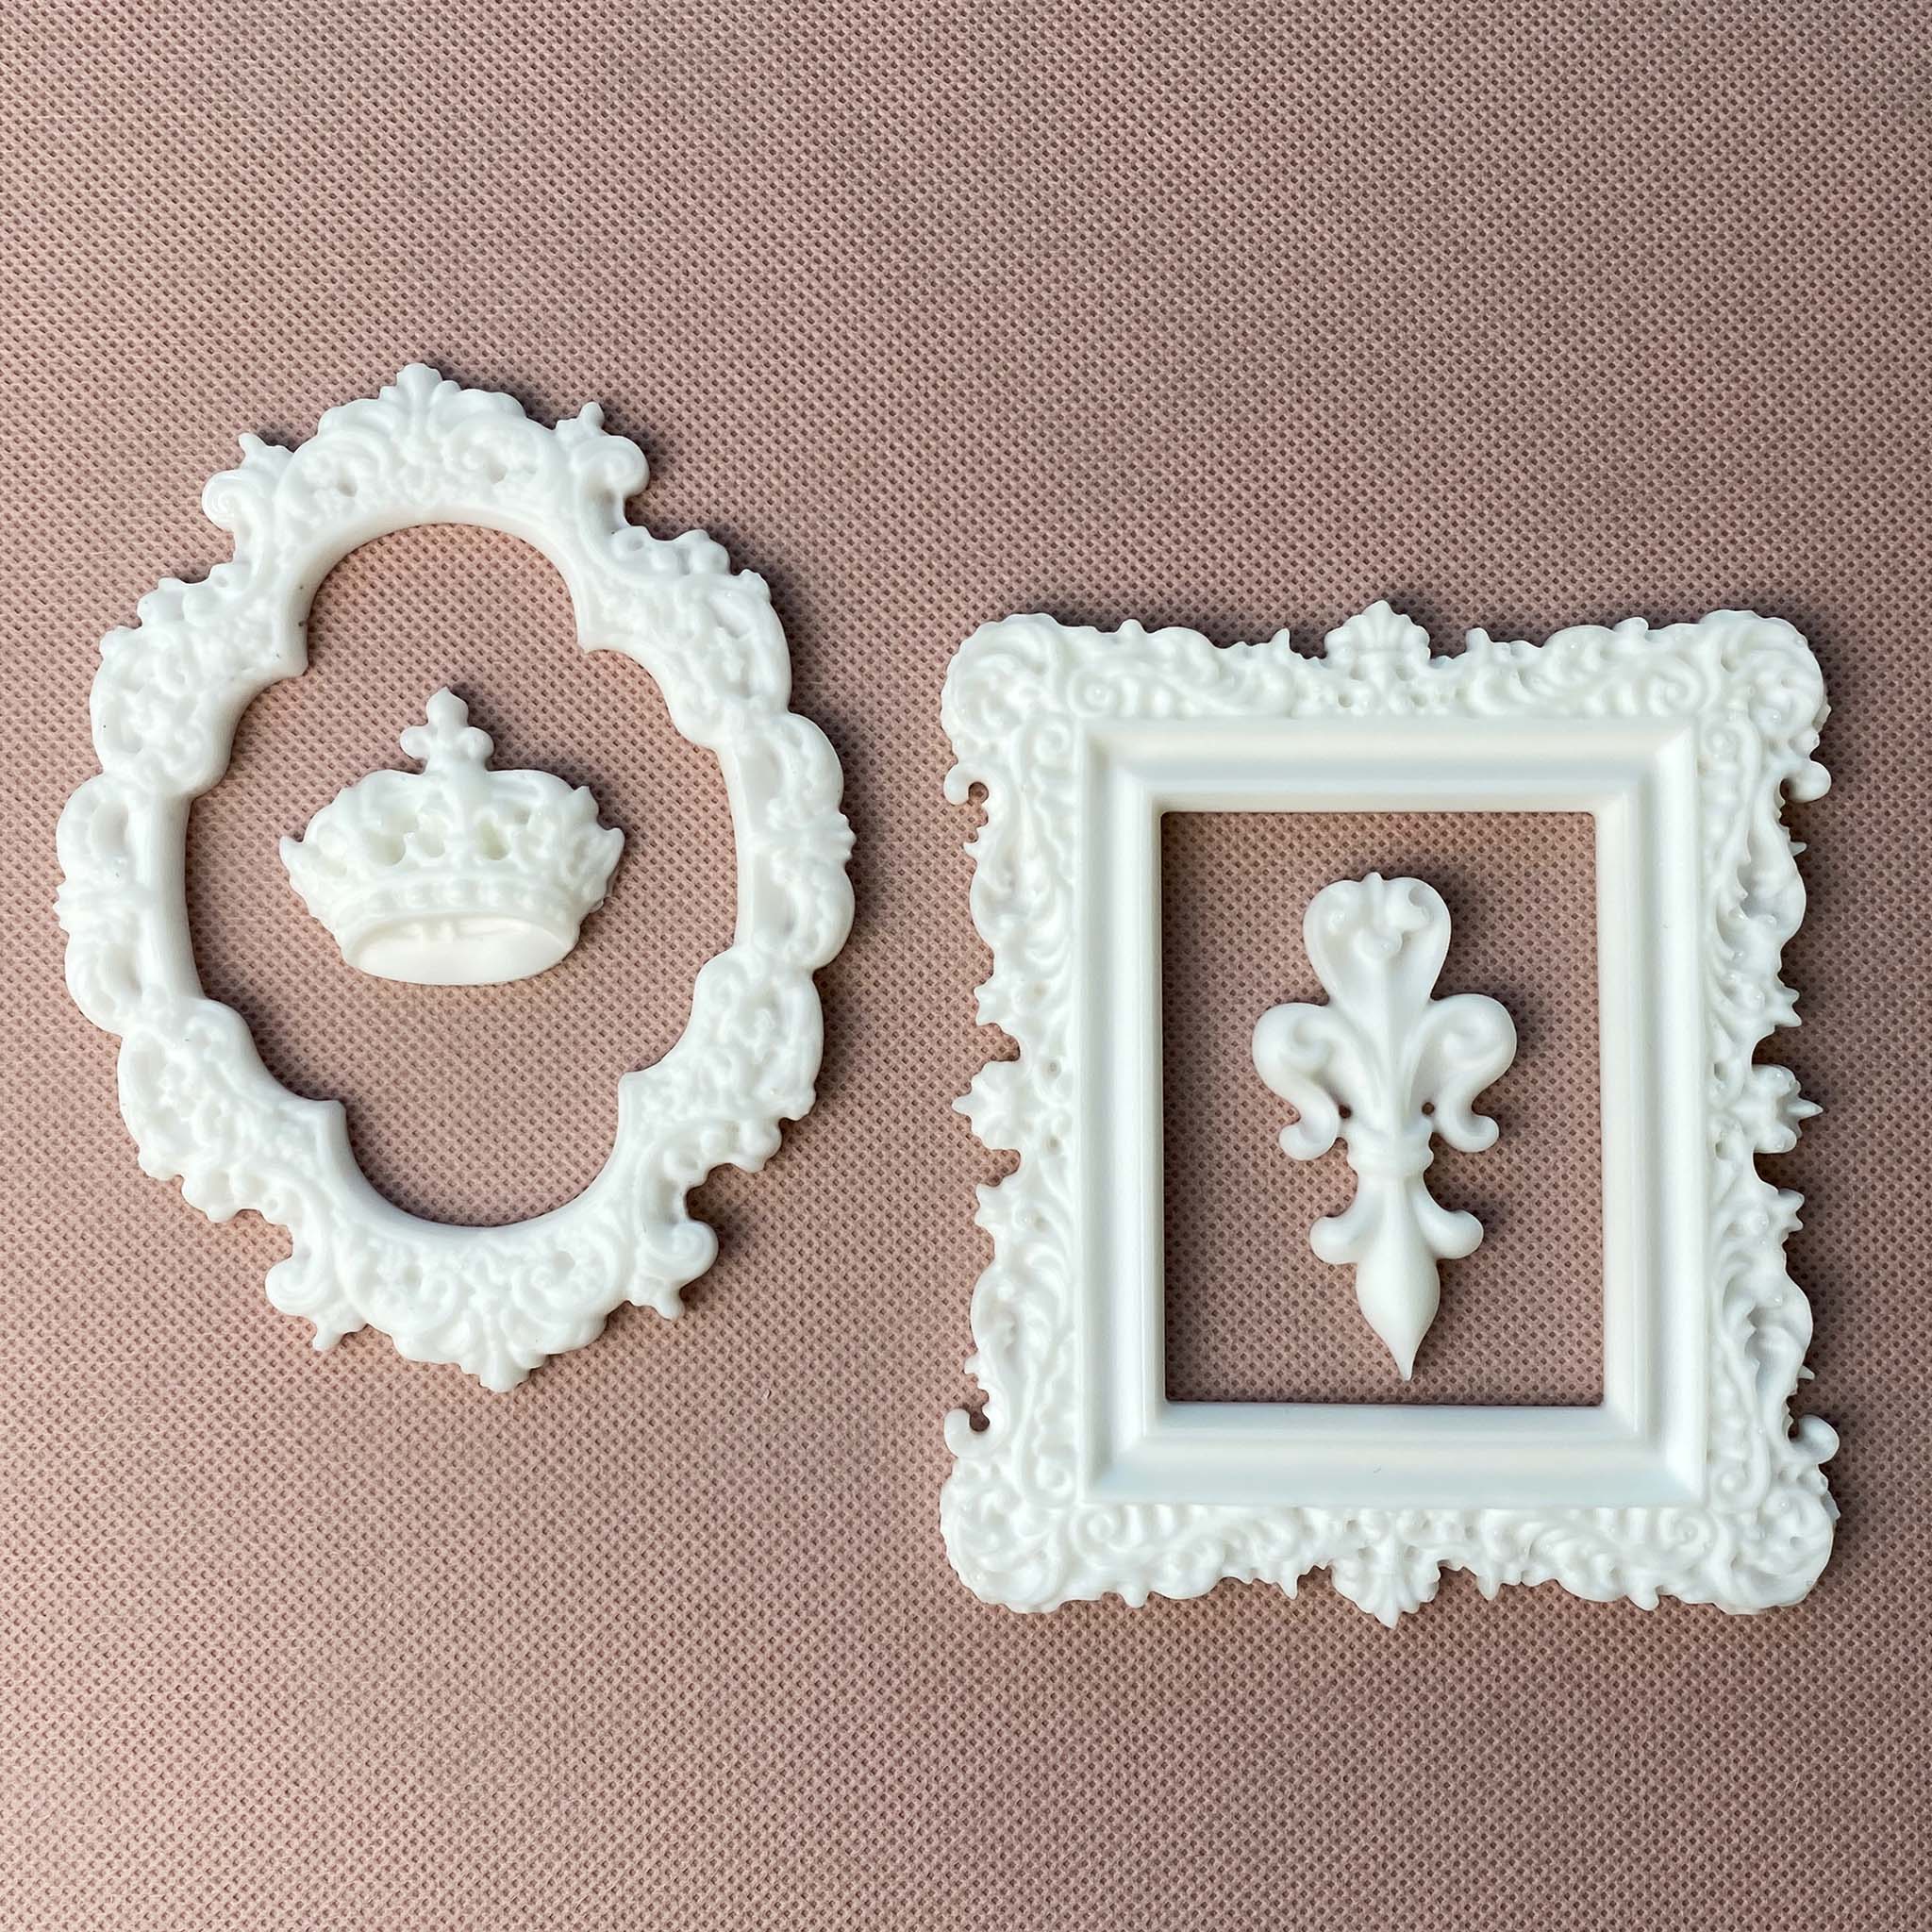 White resin castings of an ornate oval and rectangle frame are against a light beige material background. Inside the oval frame is a casting of a royal crown and inside the rectangle frame is a fleur de lis.